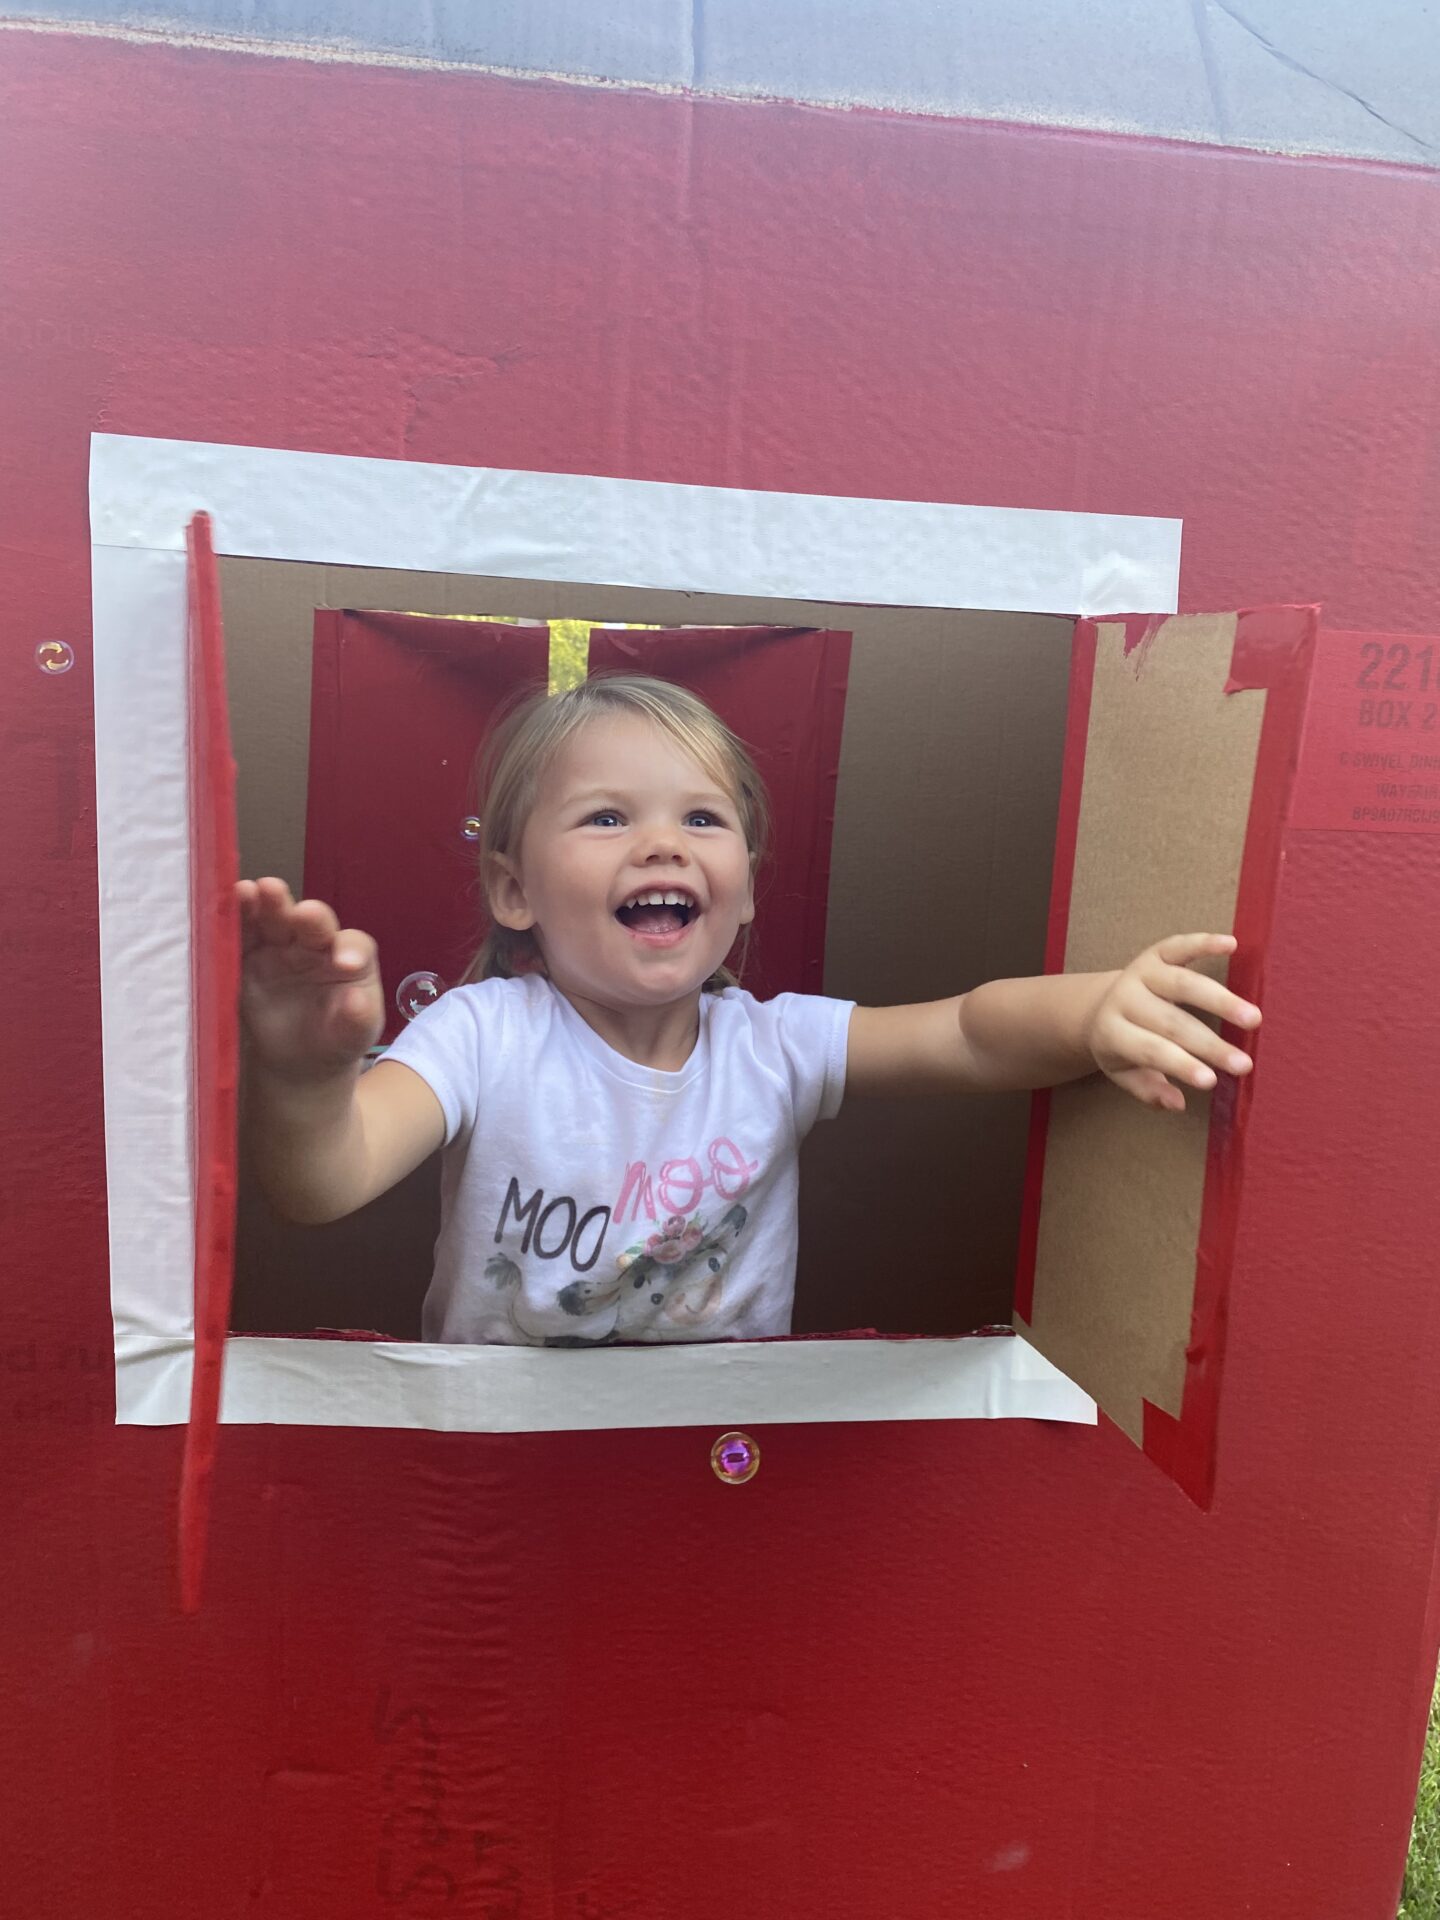 Chances are you have some cardboard boxes laying around your garage.  Let’s turn those into something fun for your child to play with.  This goes great with a Farm themed Birthday party or for your preschool Farm theme